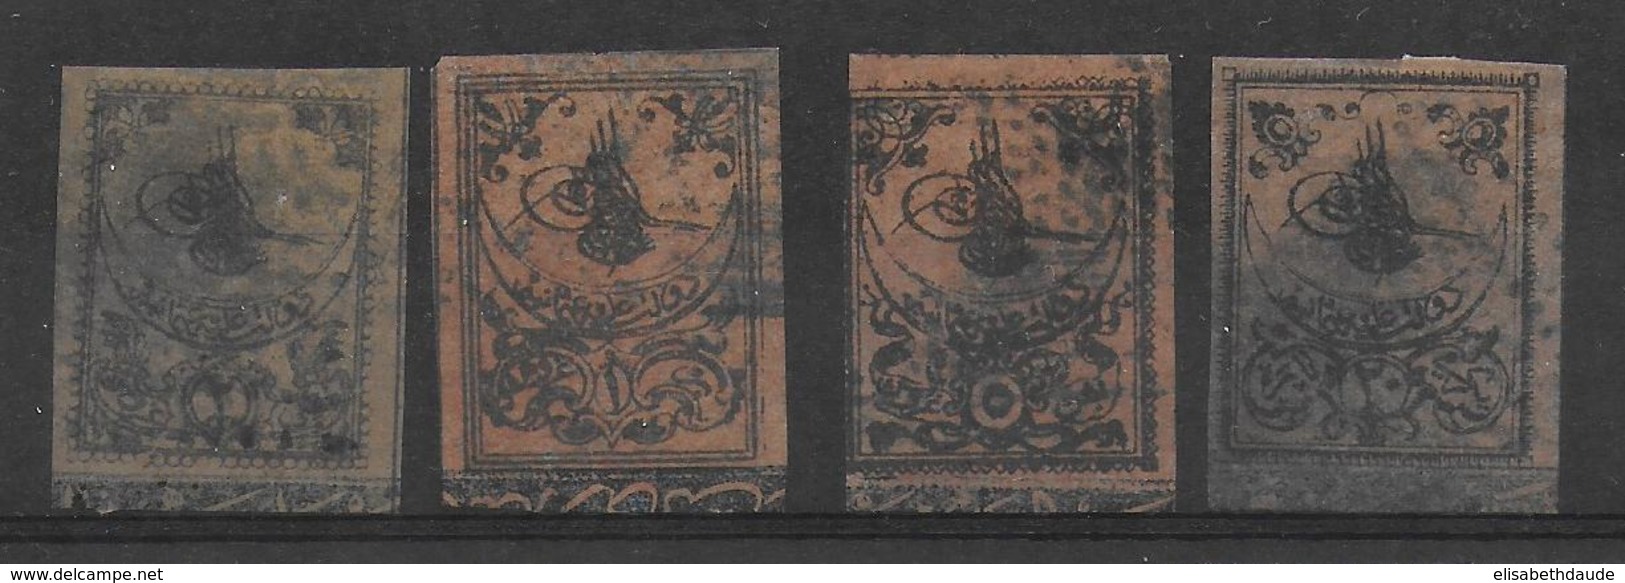 TURQUIE - TAXE YVERT N° 1/4 OBLITERES - SIGNES PASCAL SCHELLER ! - COTE = 770 EUR - Used Stamps